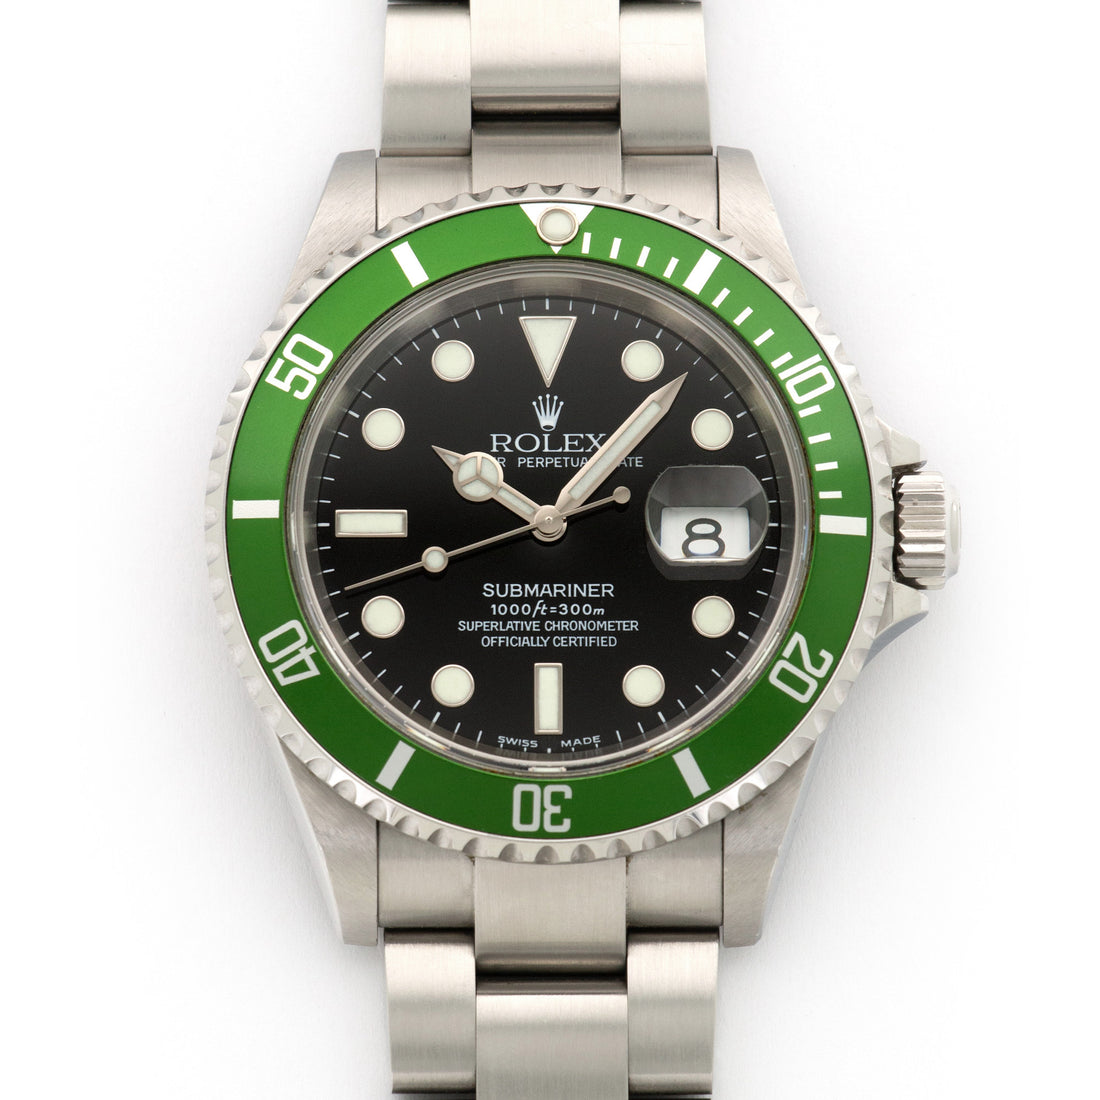 ROLEX, Submariner, Ref. 16610LV, A Stainless Steel Wristwatch with “Flat  4” Bezel and Bracelet, Circa 2004, Watches Online: The Driver's Collection, Watches